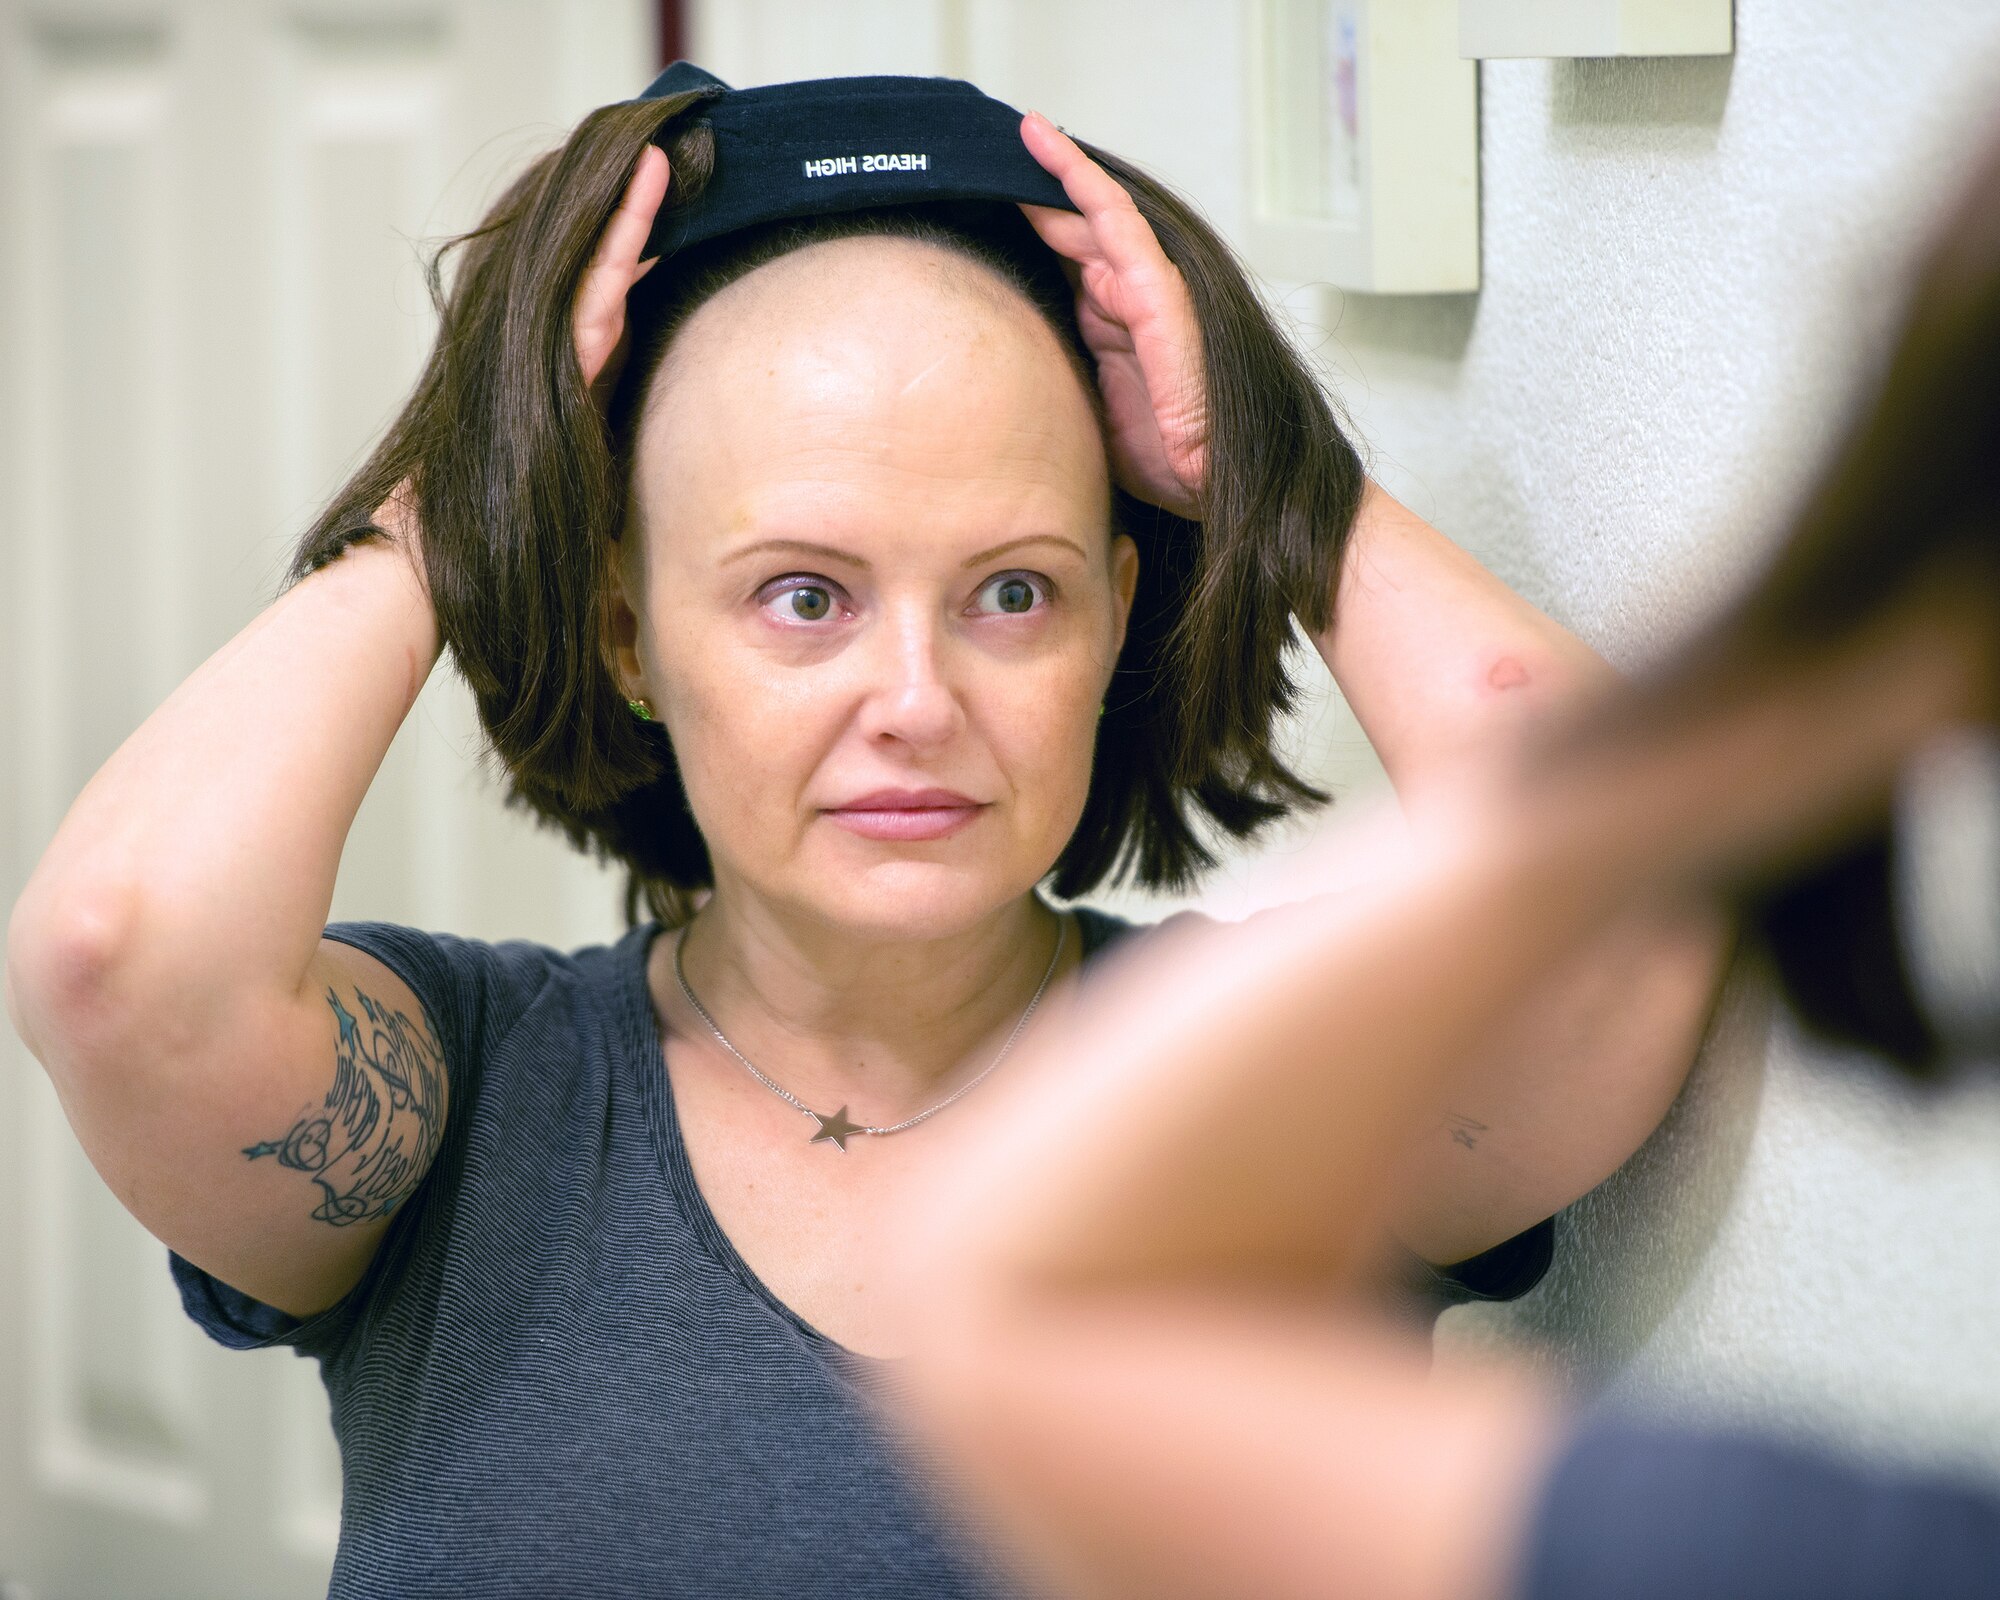 U.S. Air Force Master Sgt. Tracey Drake, 60th Medical Operations tries on a wig, Travis Air Force Base, Calif., Jan. 10, 2017. Drake was diagnosed with metastatic breast cancer during her retirement physical in July 2016, 3 weeks before starting terminal leave. Drake faces surgery, radiation, targeted infusion, and reconstruction surgery. (U.S. Air Force photo/Louis Briscese)